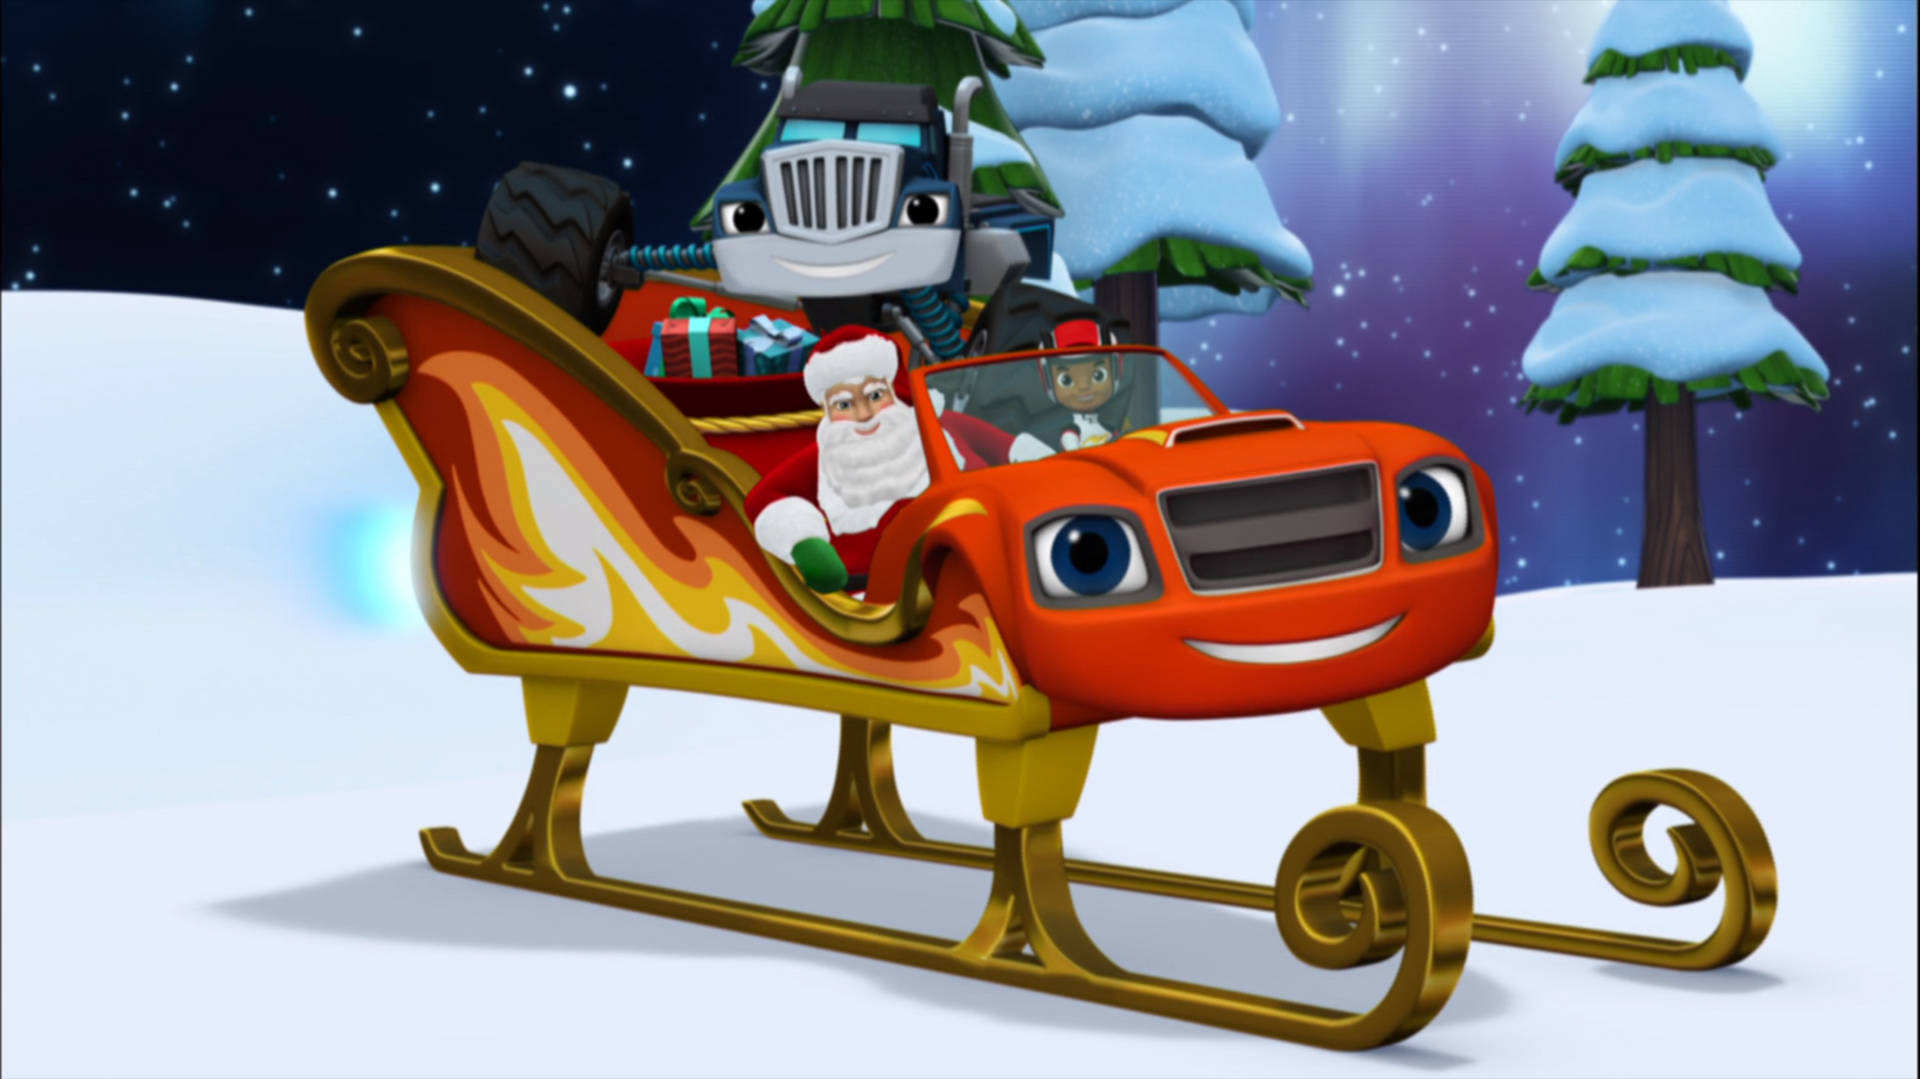 Blaze And The Monster Machines Sleigh Background